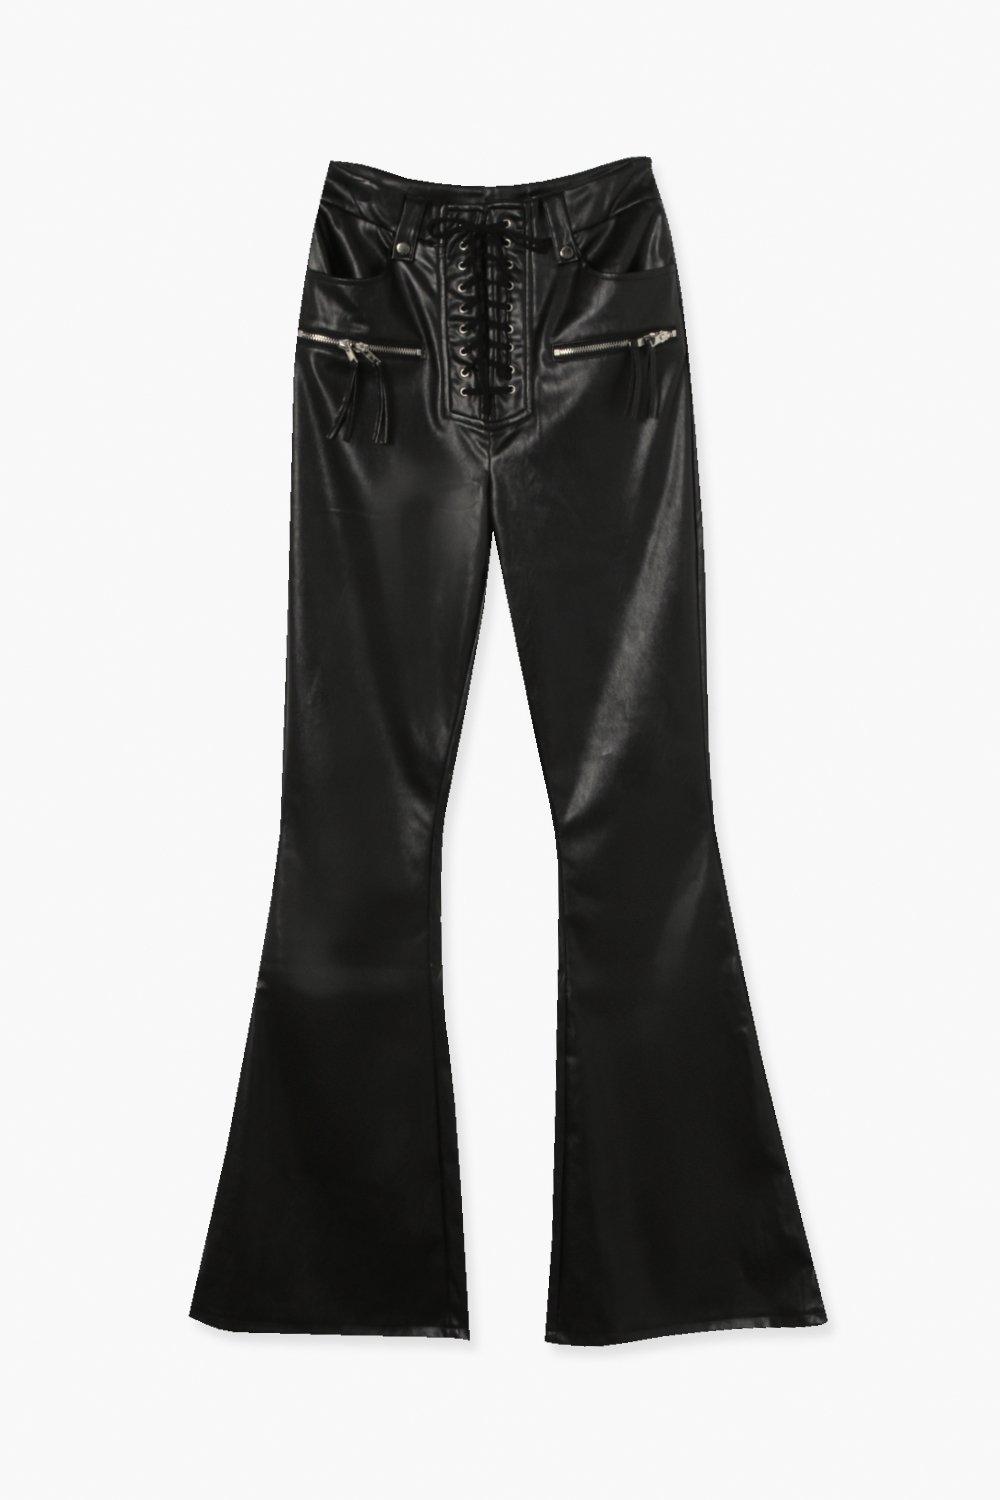 Product Name: Boot Barn X Understated Leather Women's Rhinestone Studded  Lace-Up Flare Leather Pants